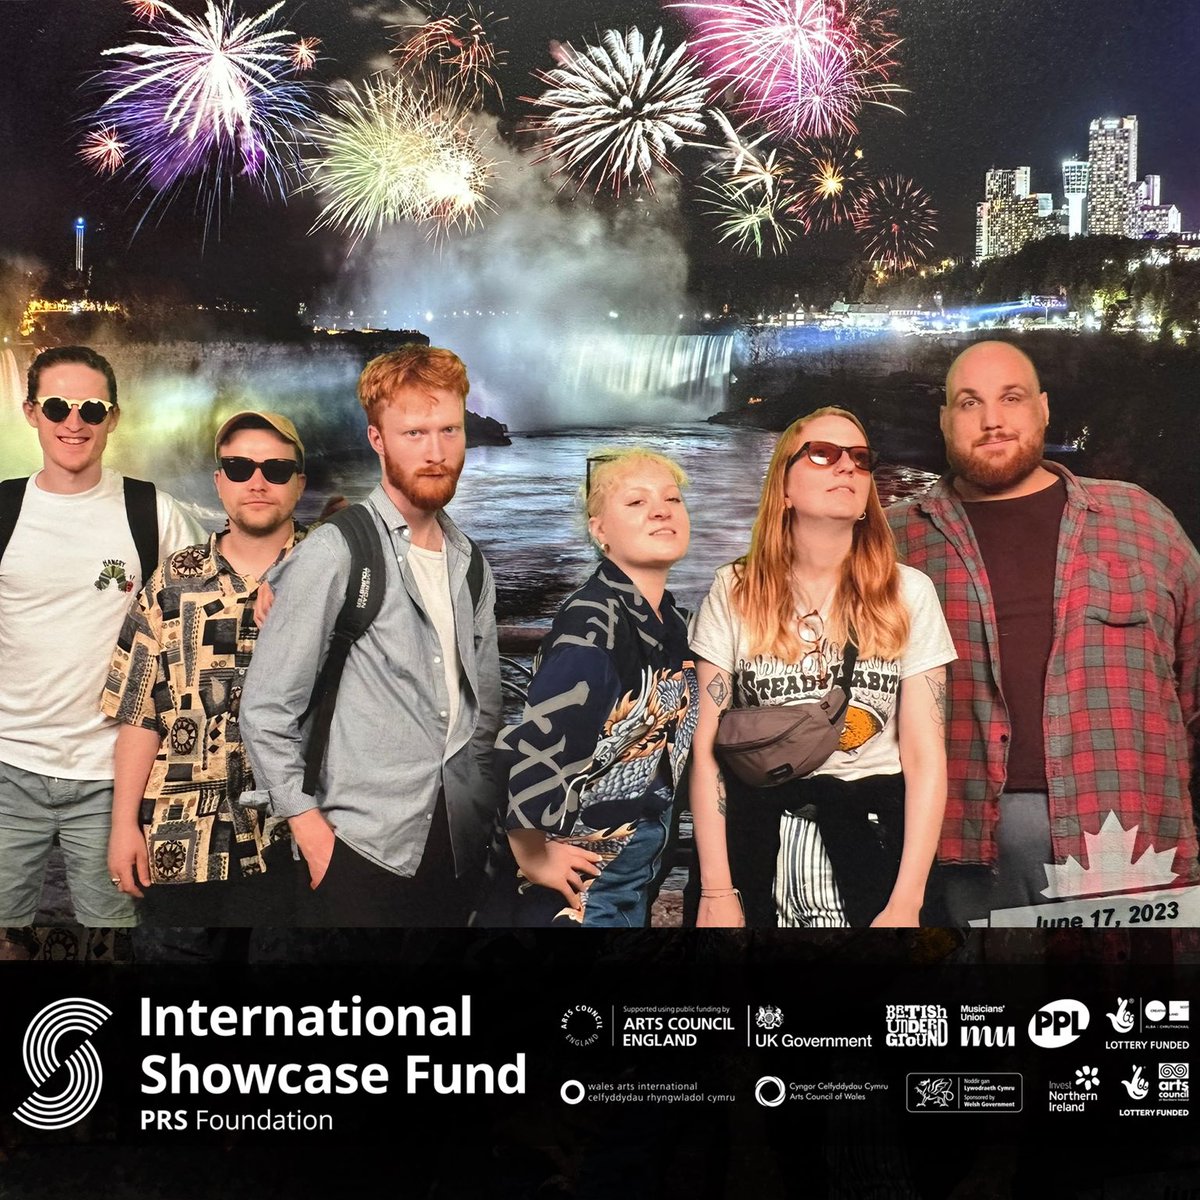 Thank you @PRSFoundation ! @nxne was a blast ! The People Versus is supported by PRS Foundation’s International Showcase Fund, which is run by PRS Foundation